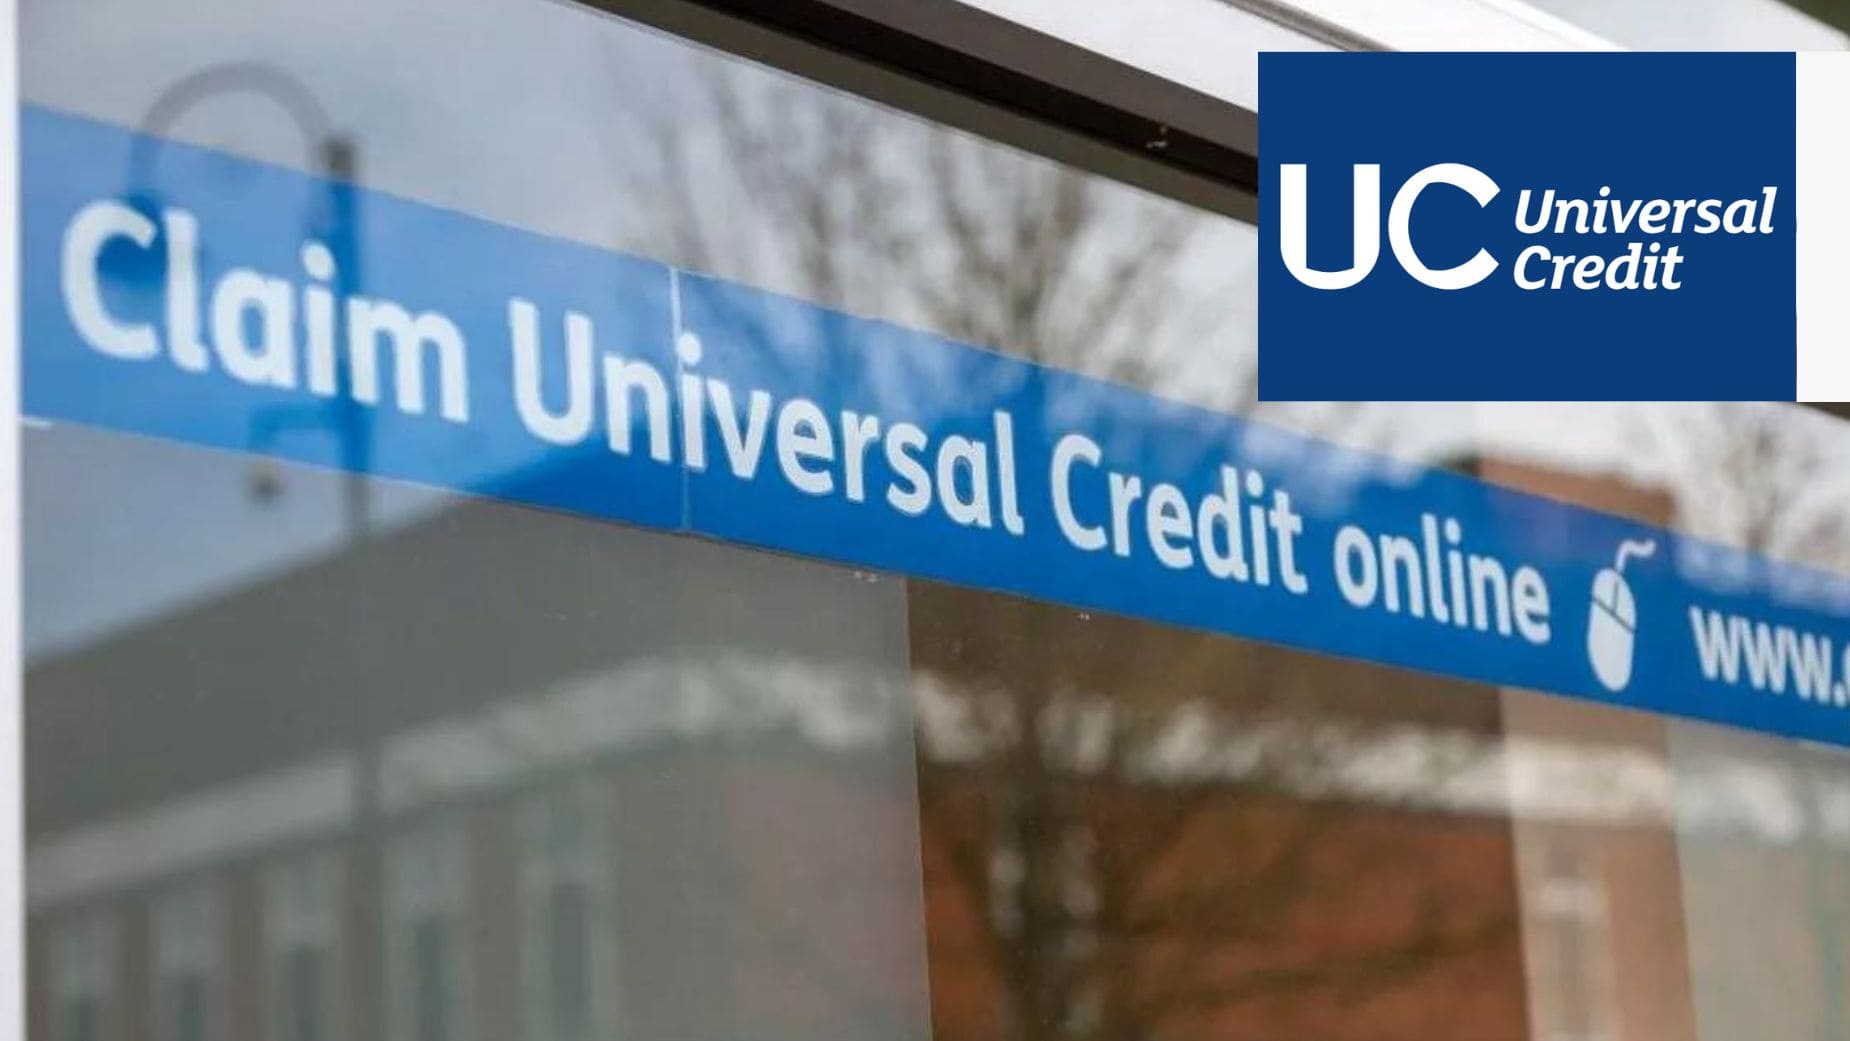 Changes to Universal Credit: DWP warns 600,000 households to make major changes